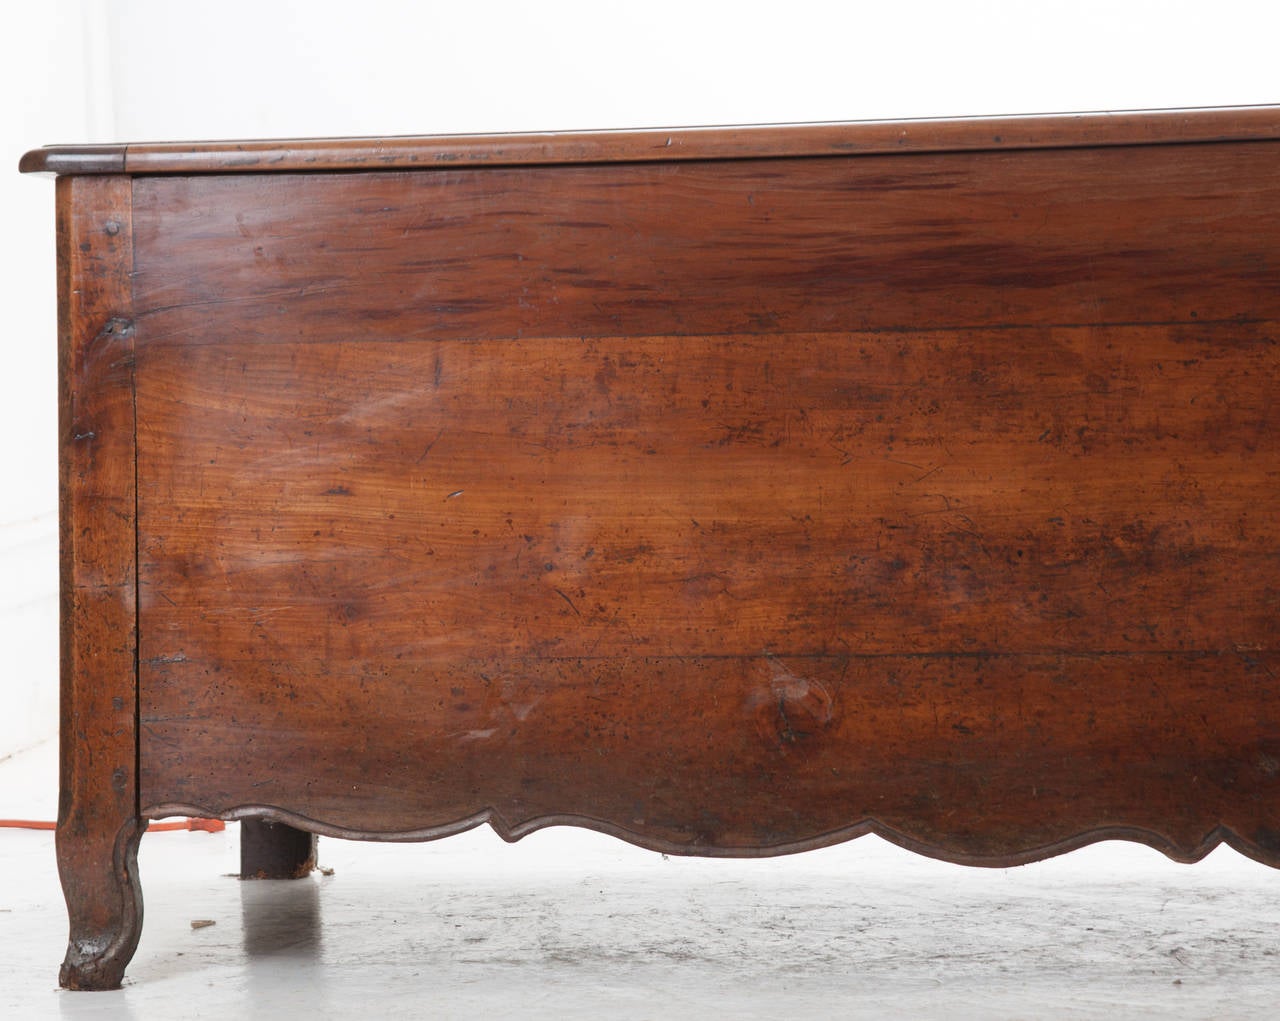 A massive solid walnut wood coffer / trunk from North West France in Brittany. This trunk is from the Louis XV period and has stood the test of time. Simple in design, this is the largest trunk we have ever seen! The top is very heavy, see the the